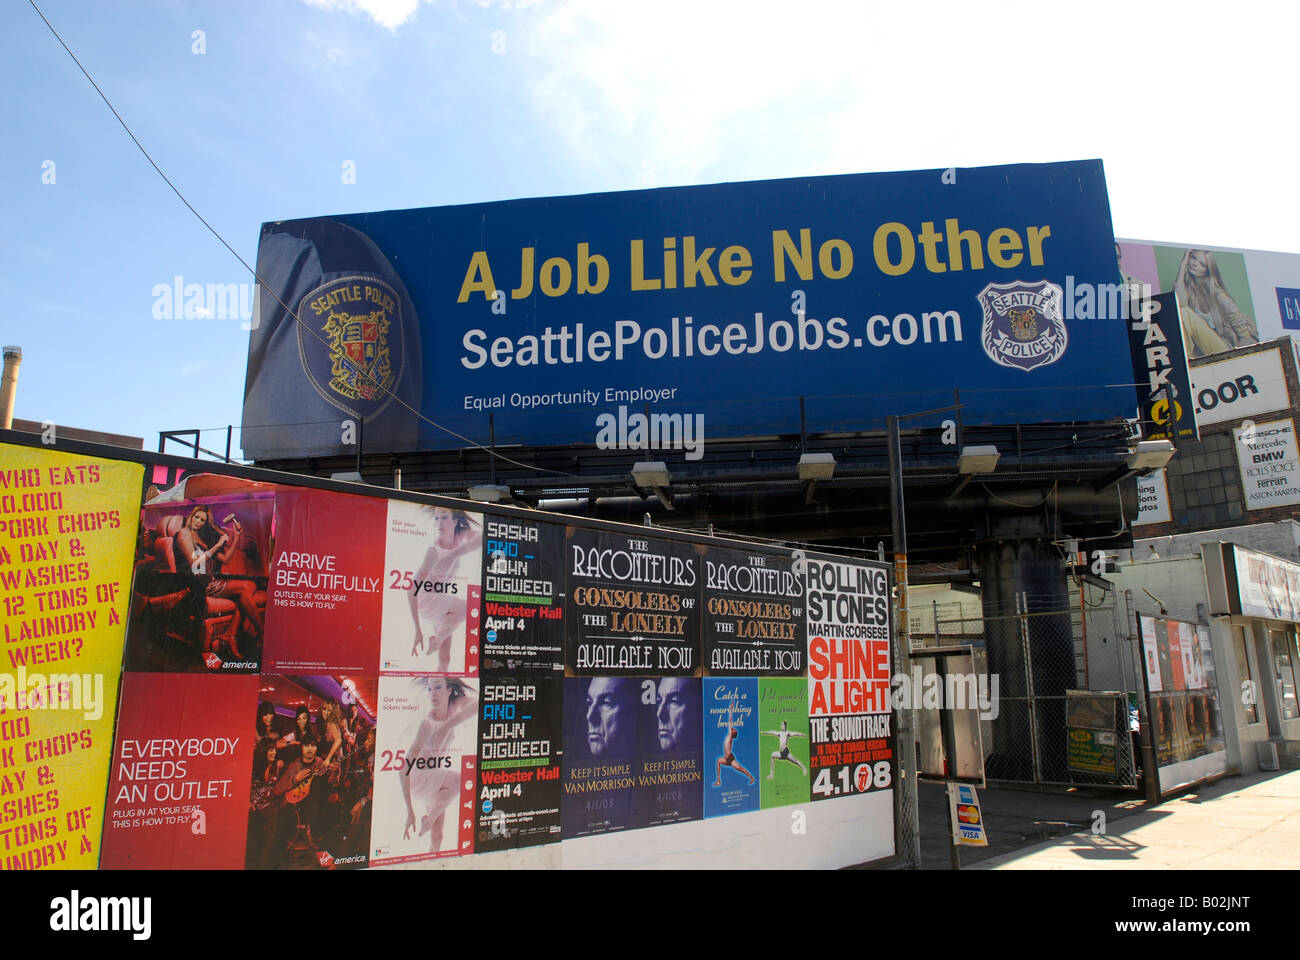 A billboard recruiting employment in the Seattle Police Dept on the West Side on Manhattan in New York Stock Photo